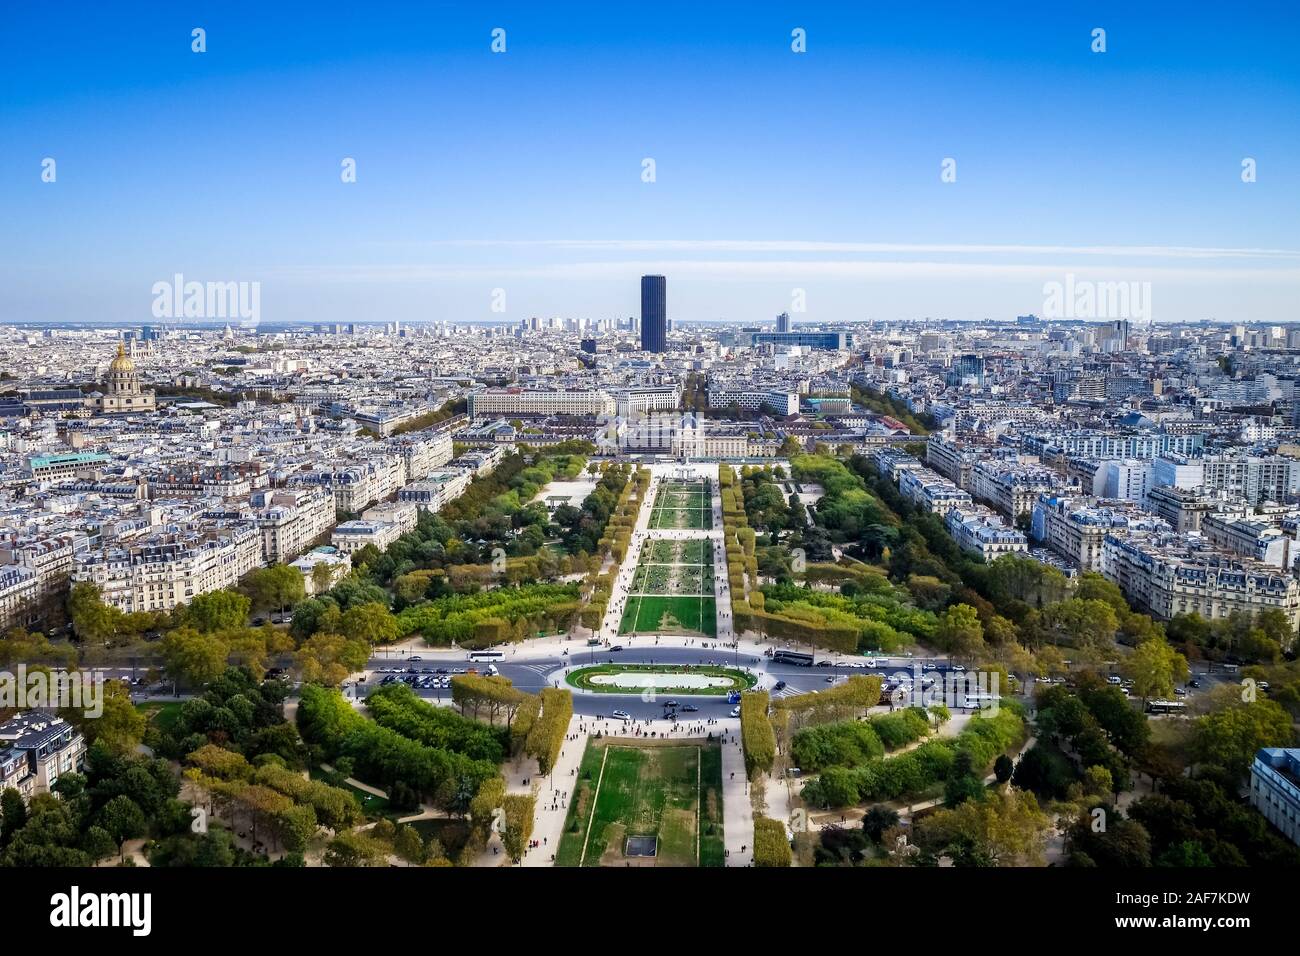 Aerial view of the Champ de Mars from Eiffel Tower, Paris, France Stock Photo